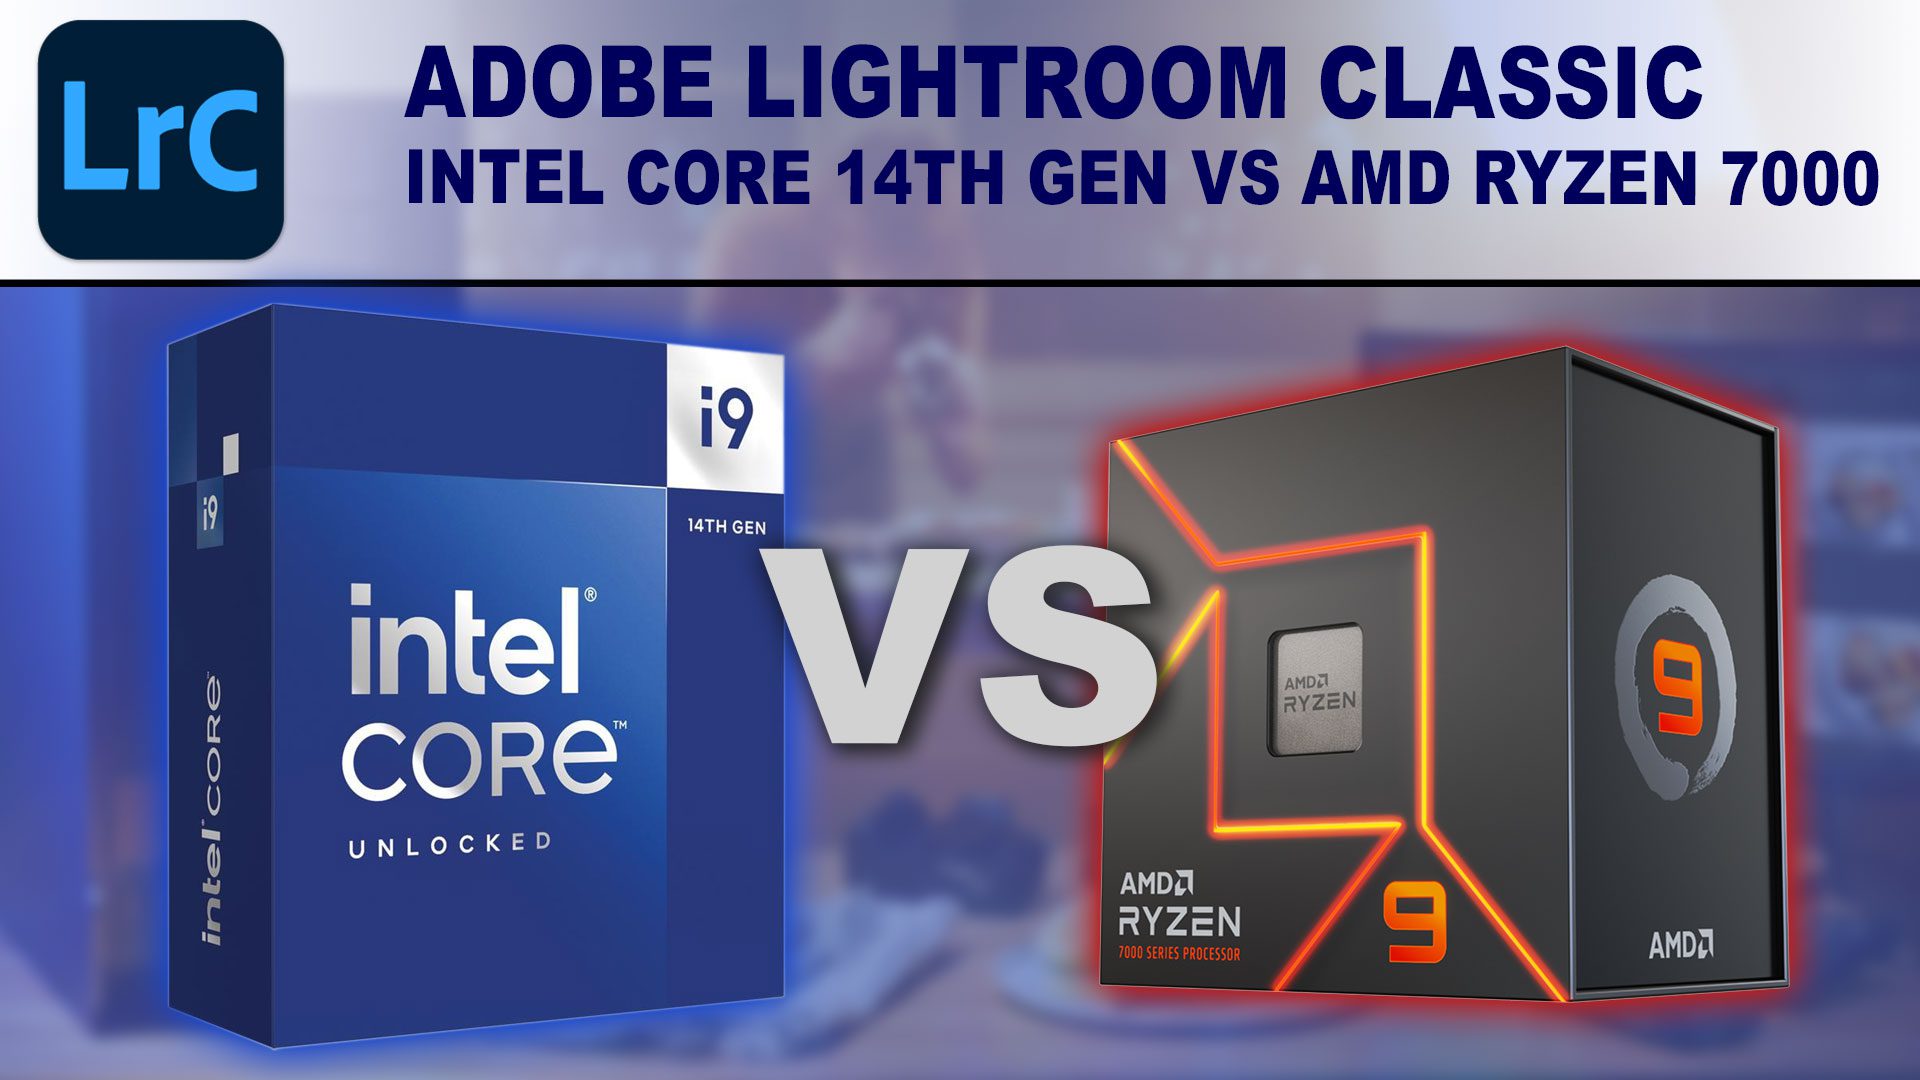 Decorative Image: Intel Core i9-14900K box and AMD Ryzen 9 7950X box on a blue background with the words "VS" between them and the title "Adobe Lightroom" above them.